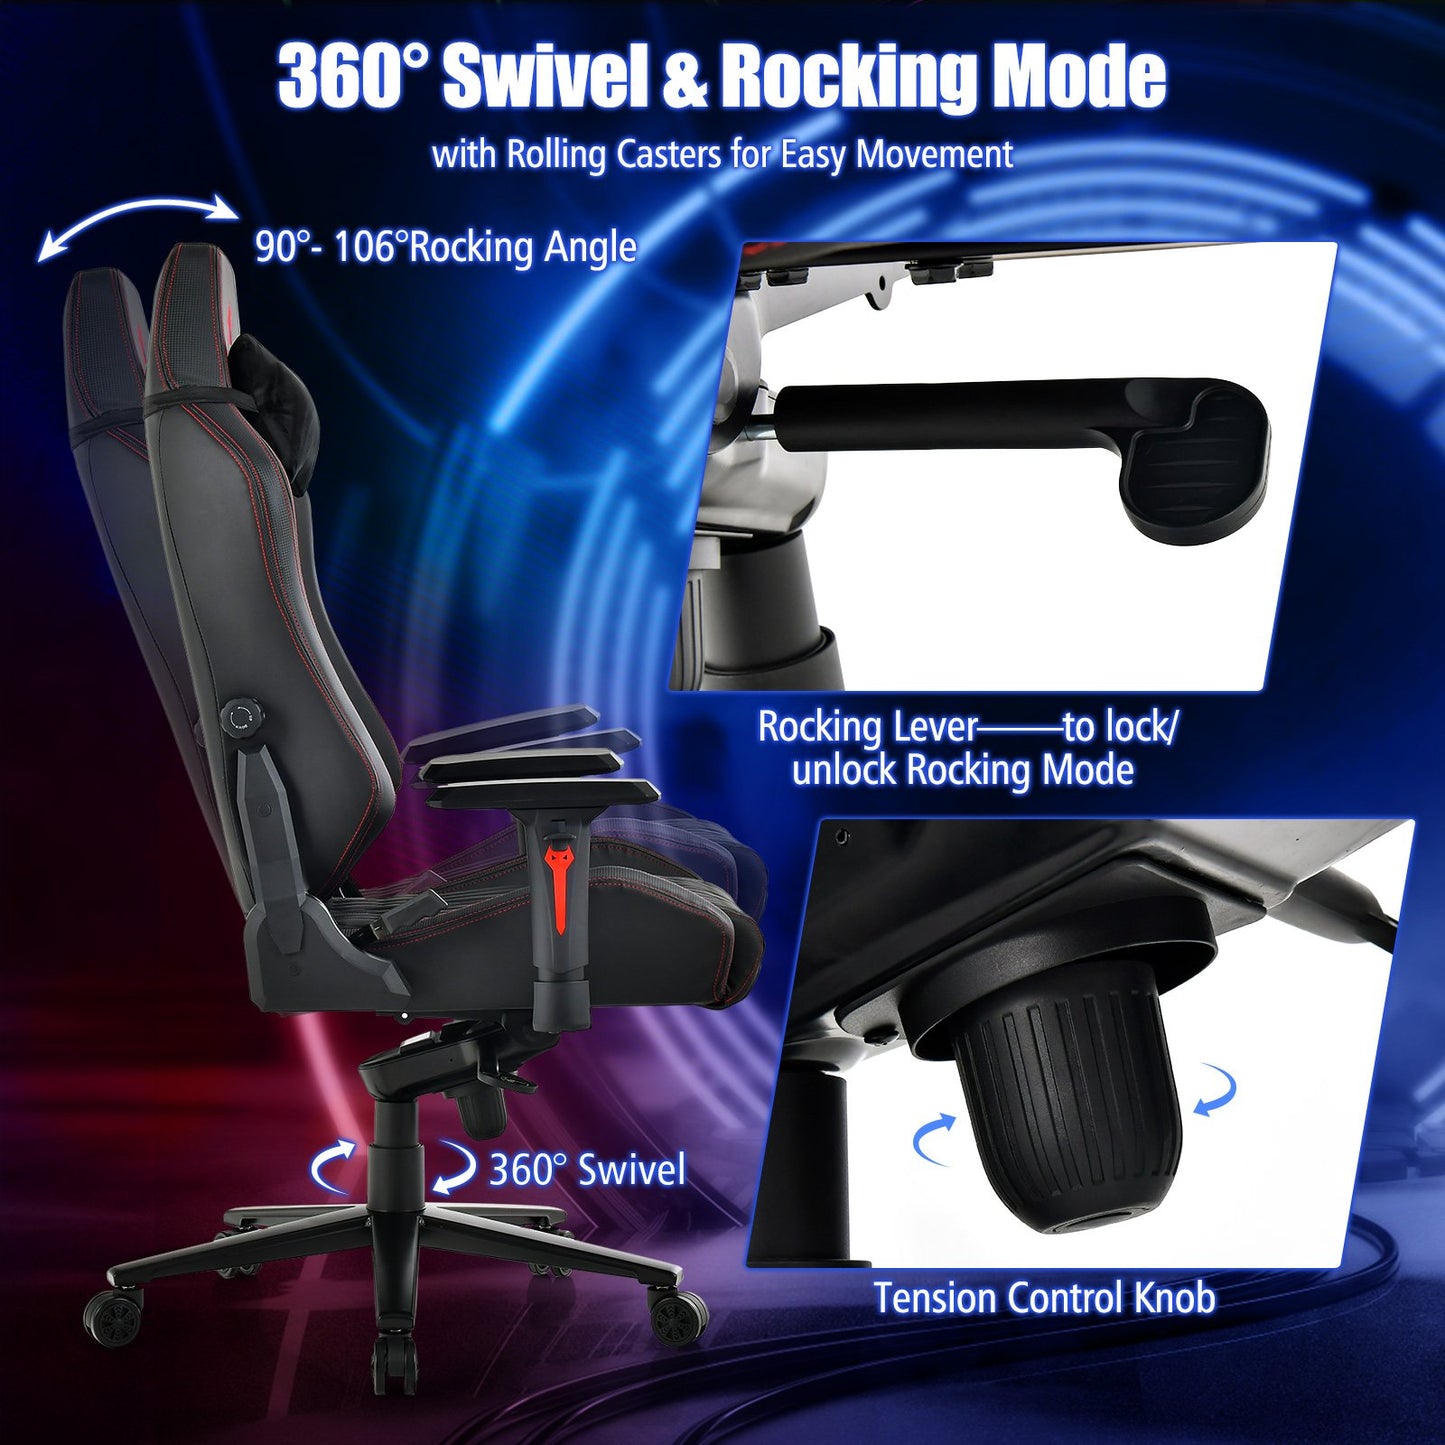 Adjustable Gaming Chair with Gas Lift 4D Armrest and Lumbar Support, Black at Gallery Canada